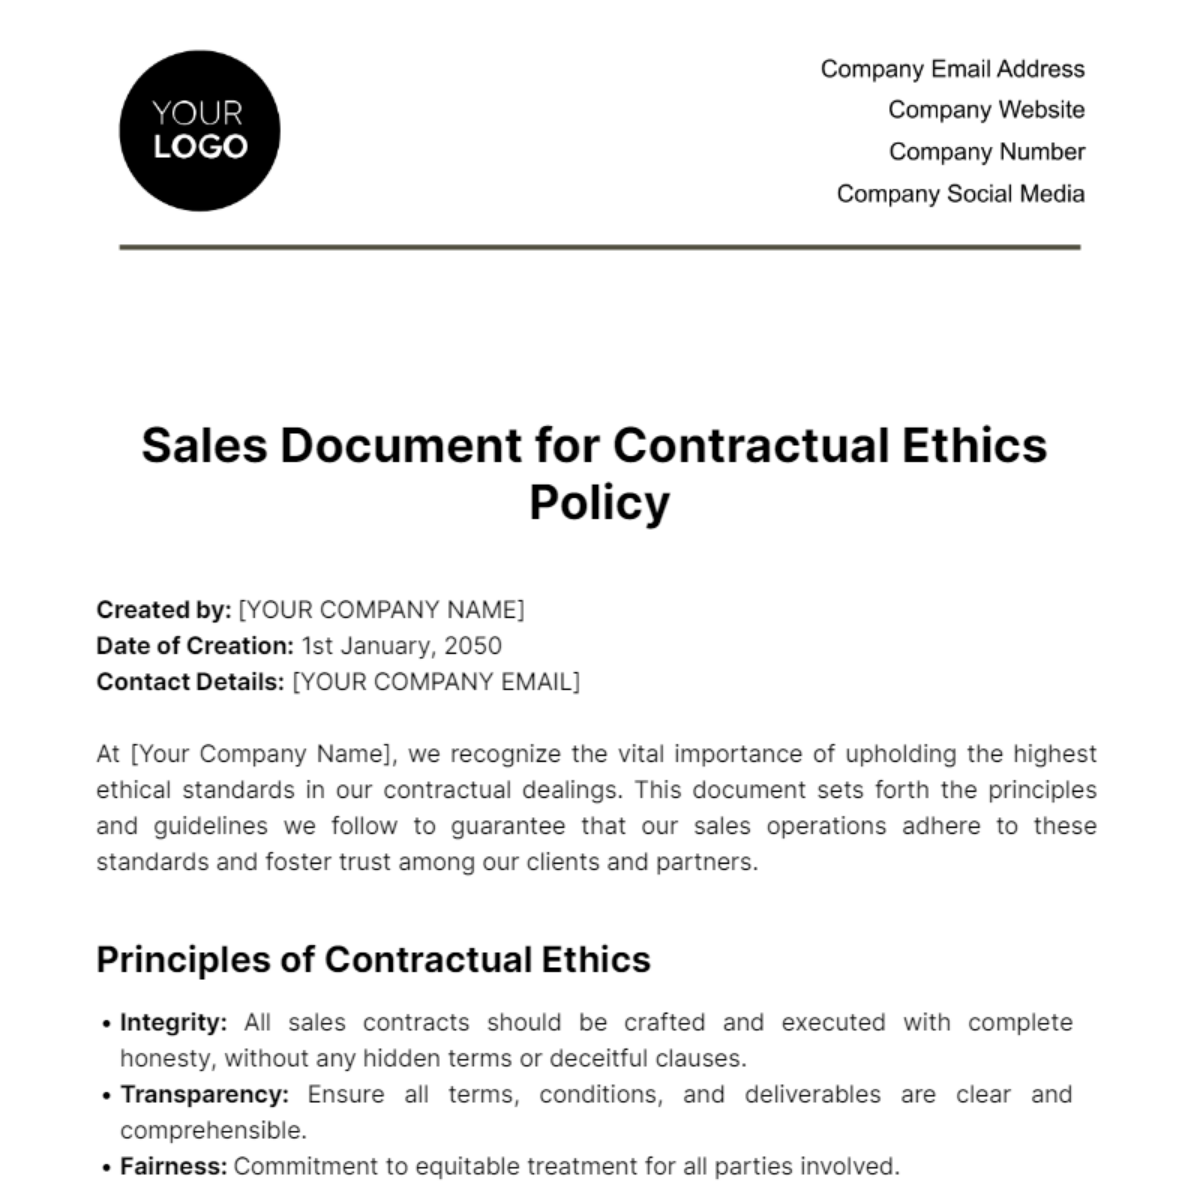 Free Sales Document for Contractual Ethics Template